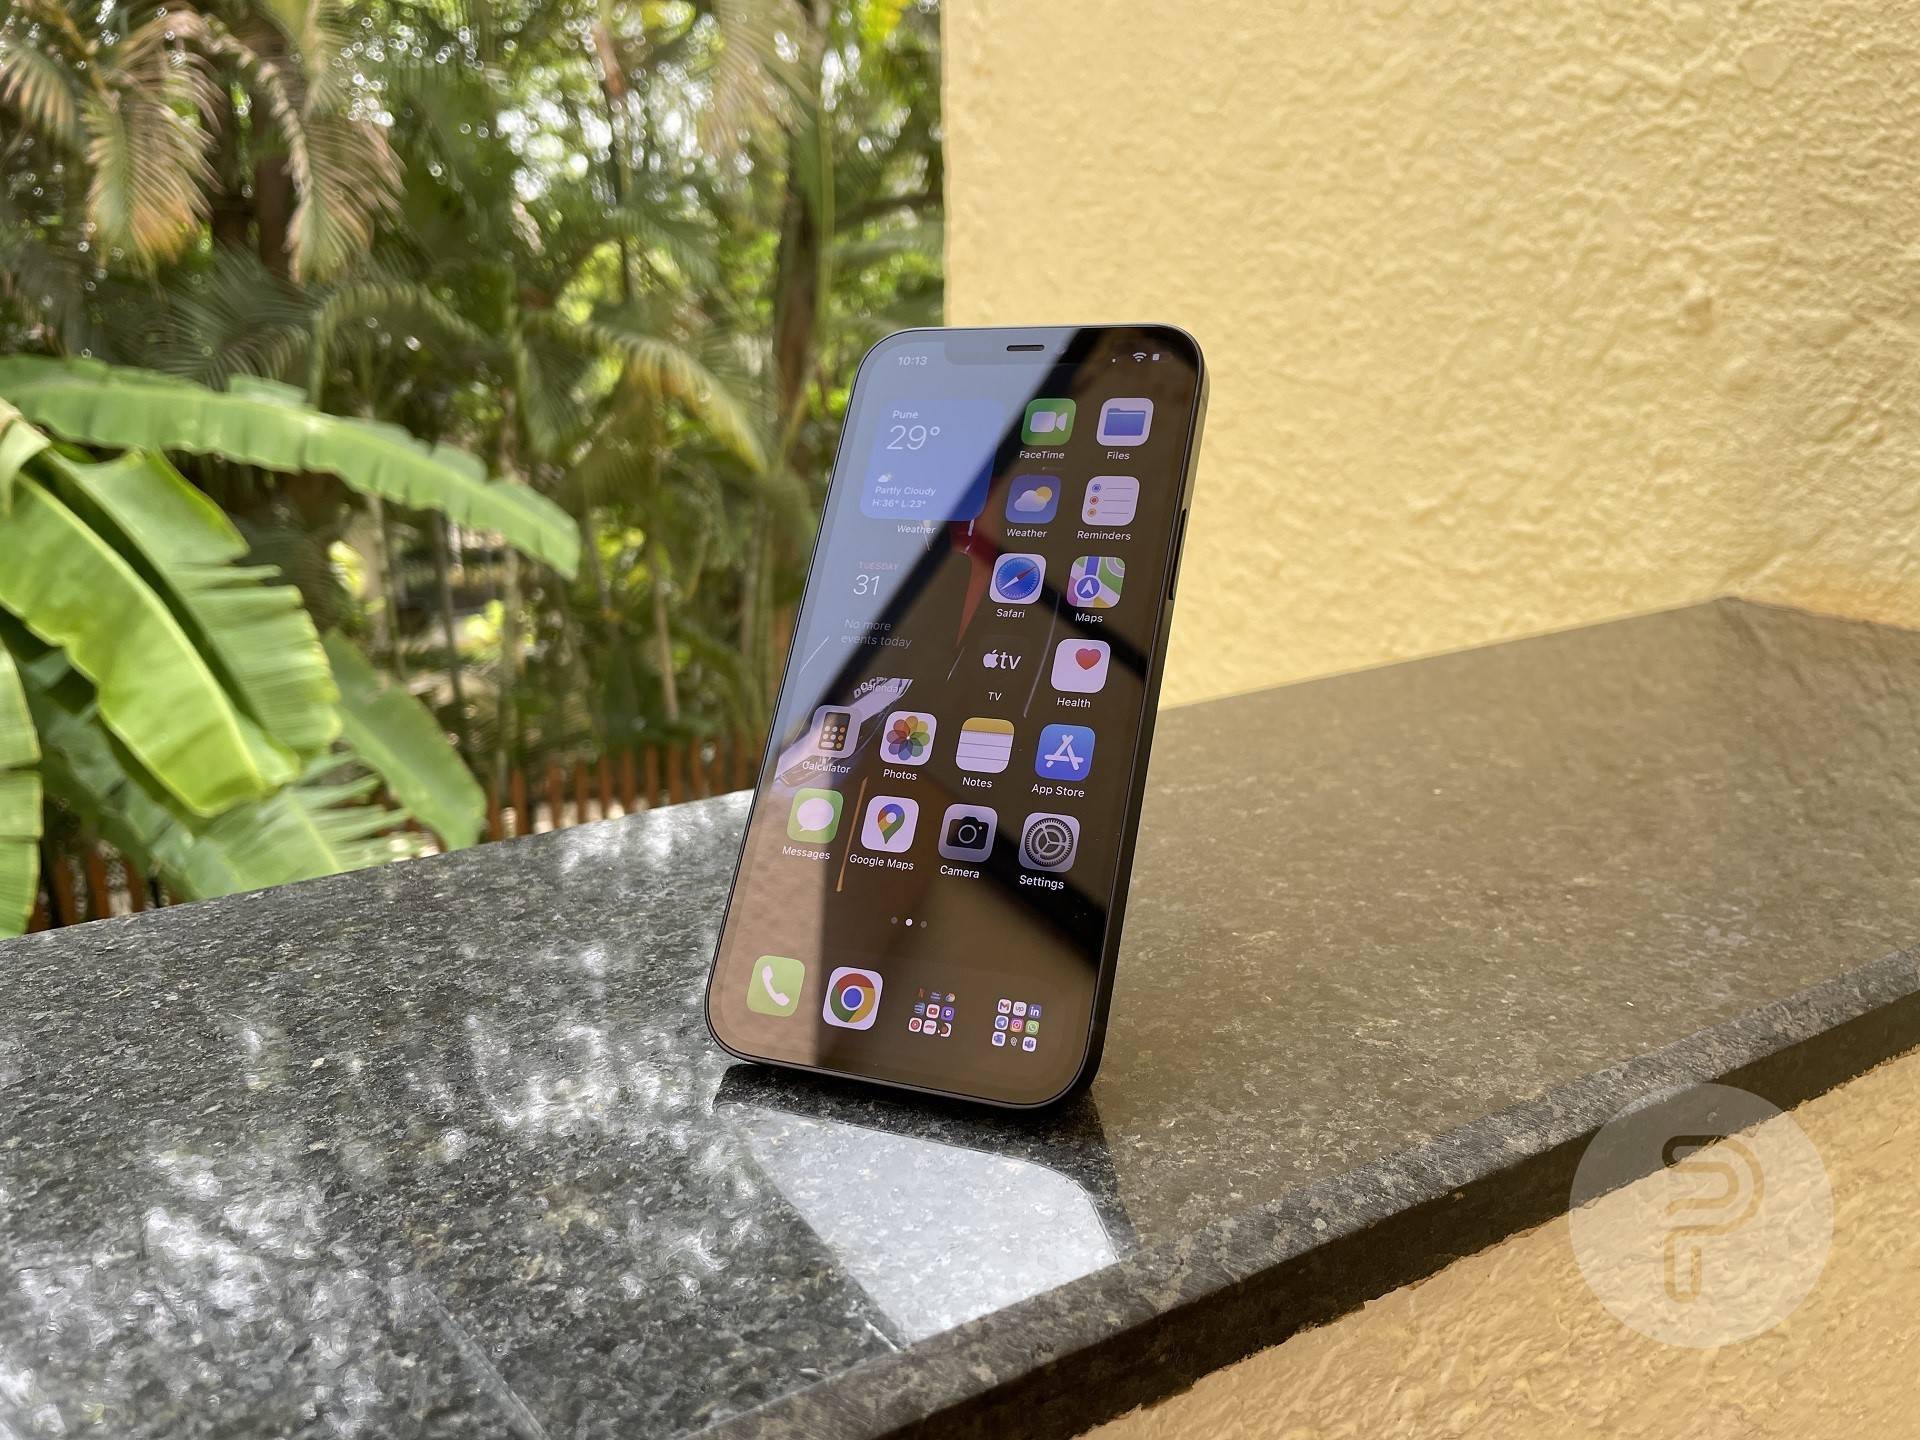 moft snap-on phone stand holding up an iPhone in portrait mode at a slight angle